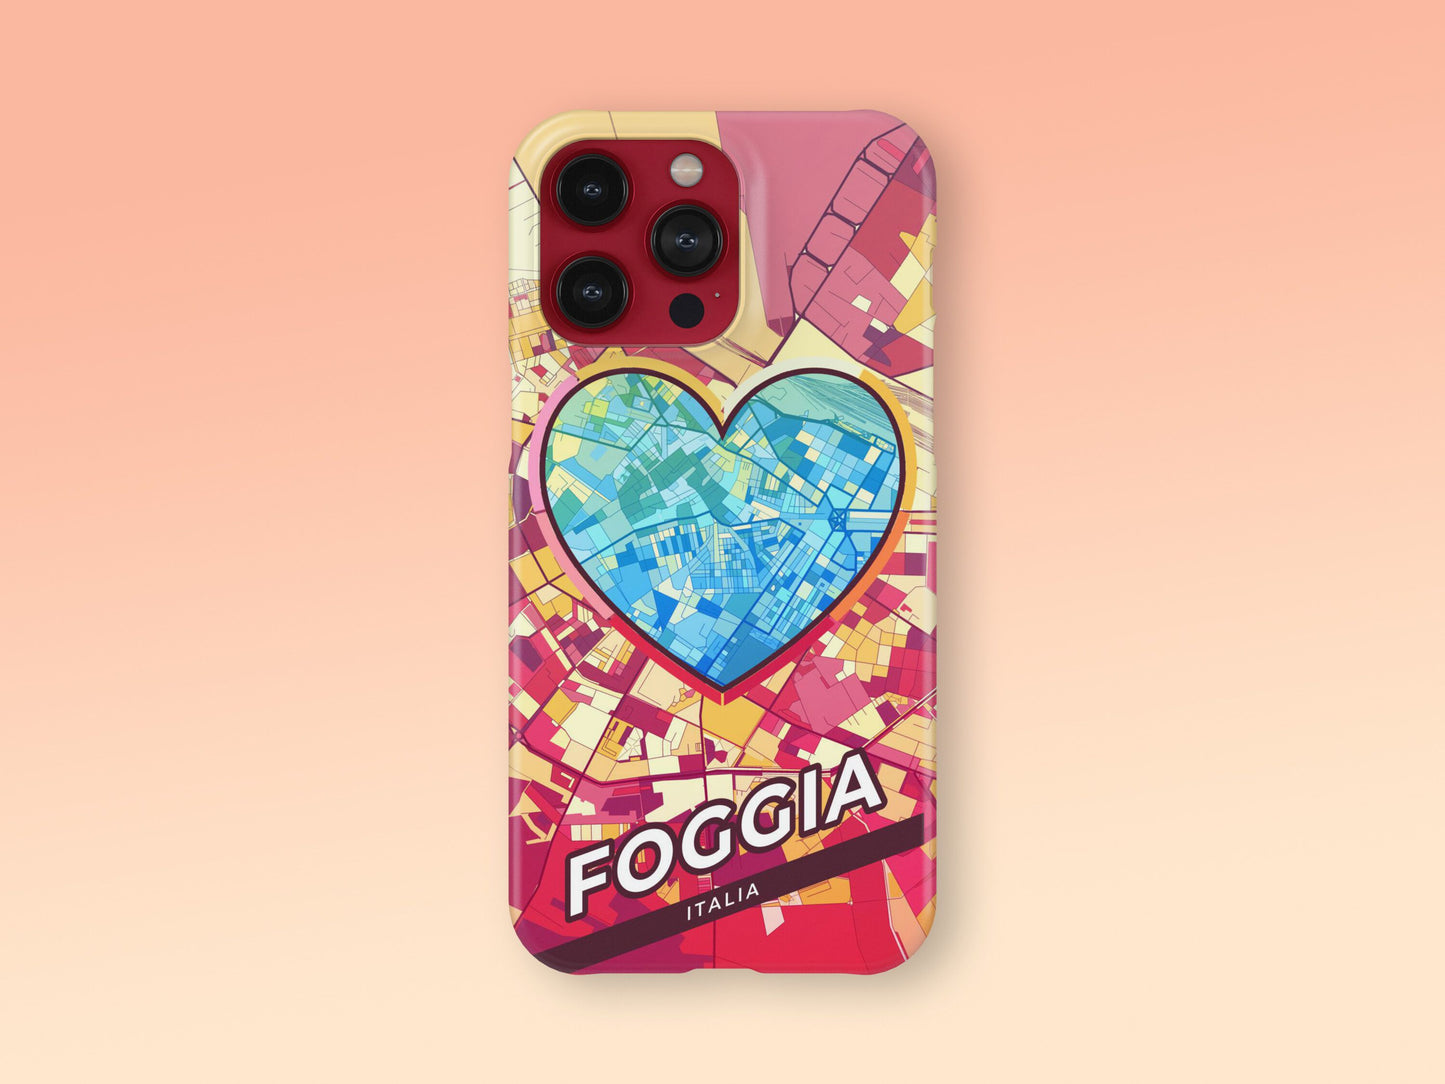 Foggia Italy slim phone case with colorful icon. Birthday, wedding or housewarming gift. Couple match cases. 2